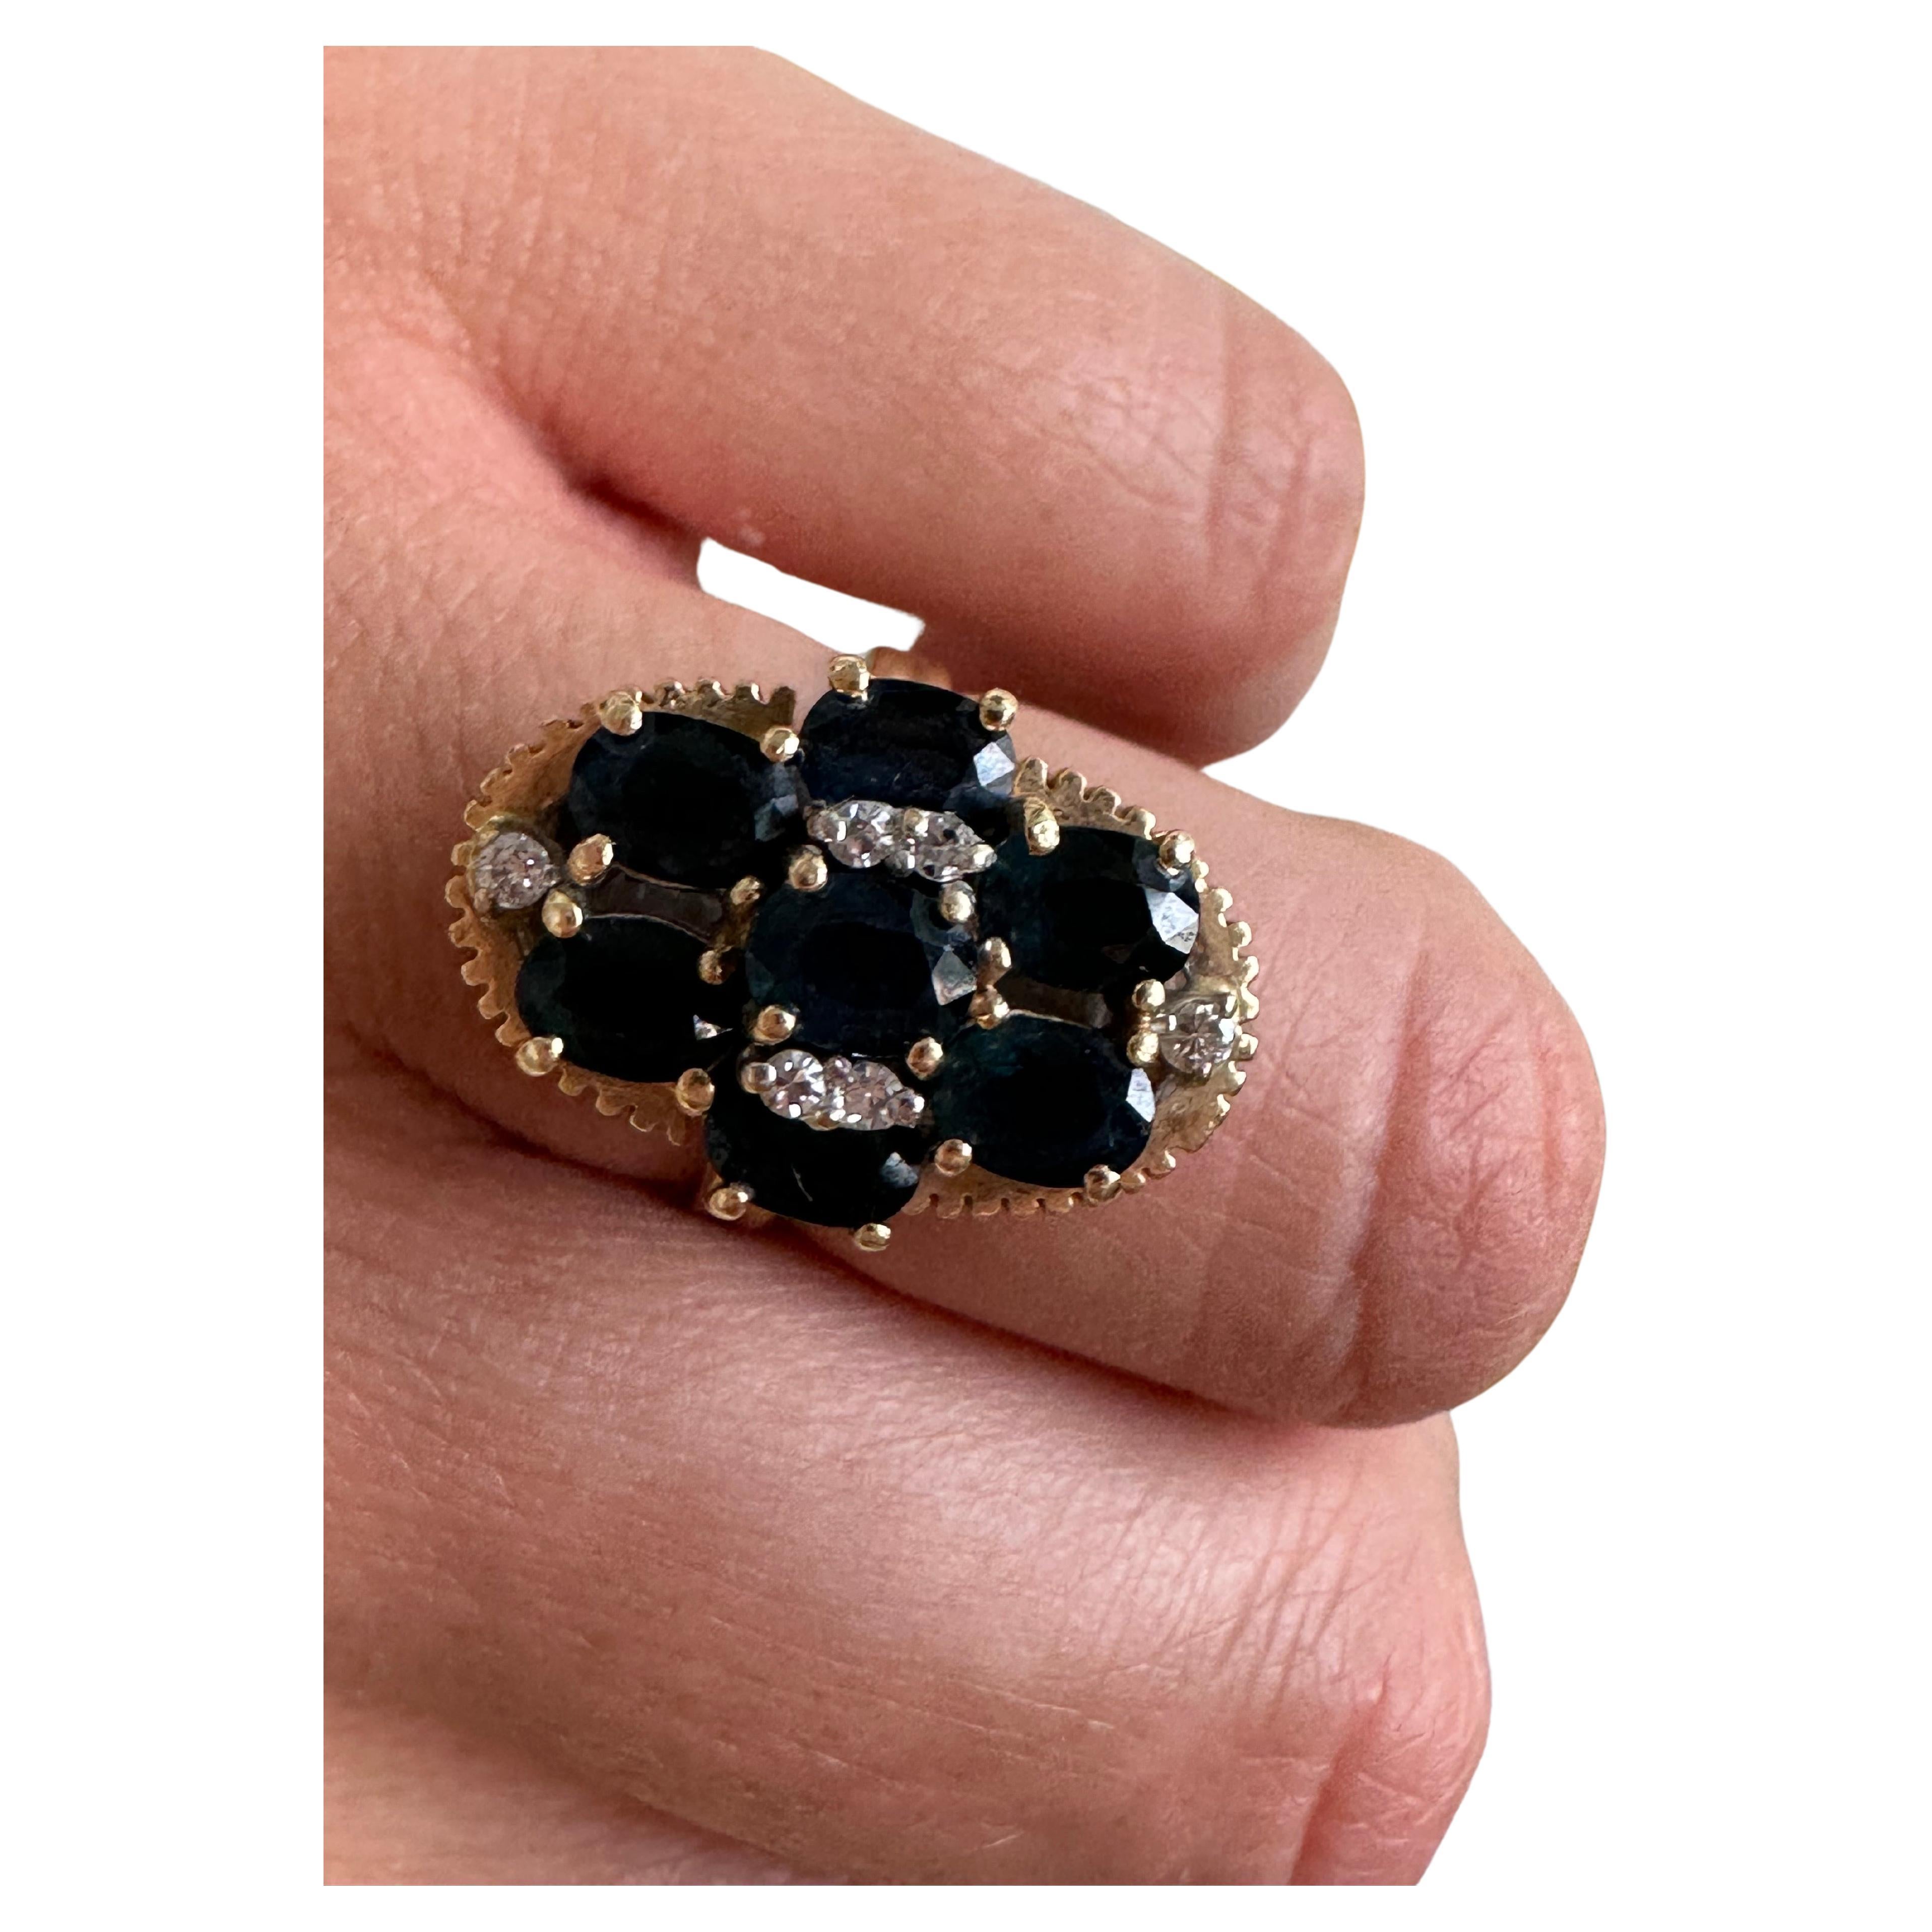 Antique sapphire and diamond ring in 14KT yellow gold. Dark blue sapphires totalling 6.50 carats.

METAL: 14KT yellow
NATURAL DIAMOND(S)
Clarity/Color: SI/H
Carat:0.12ct
Cut:Round
Grams:7.81
size: 6
Item20000099 apf

WHAT YOU GET AT STAMPAR